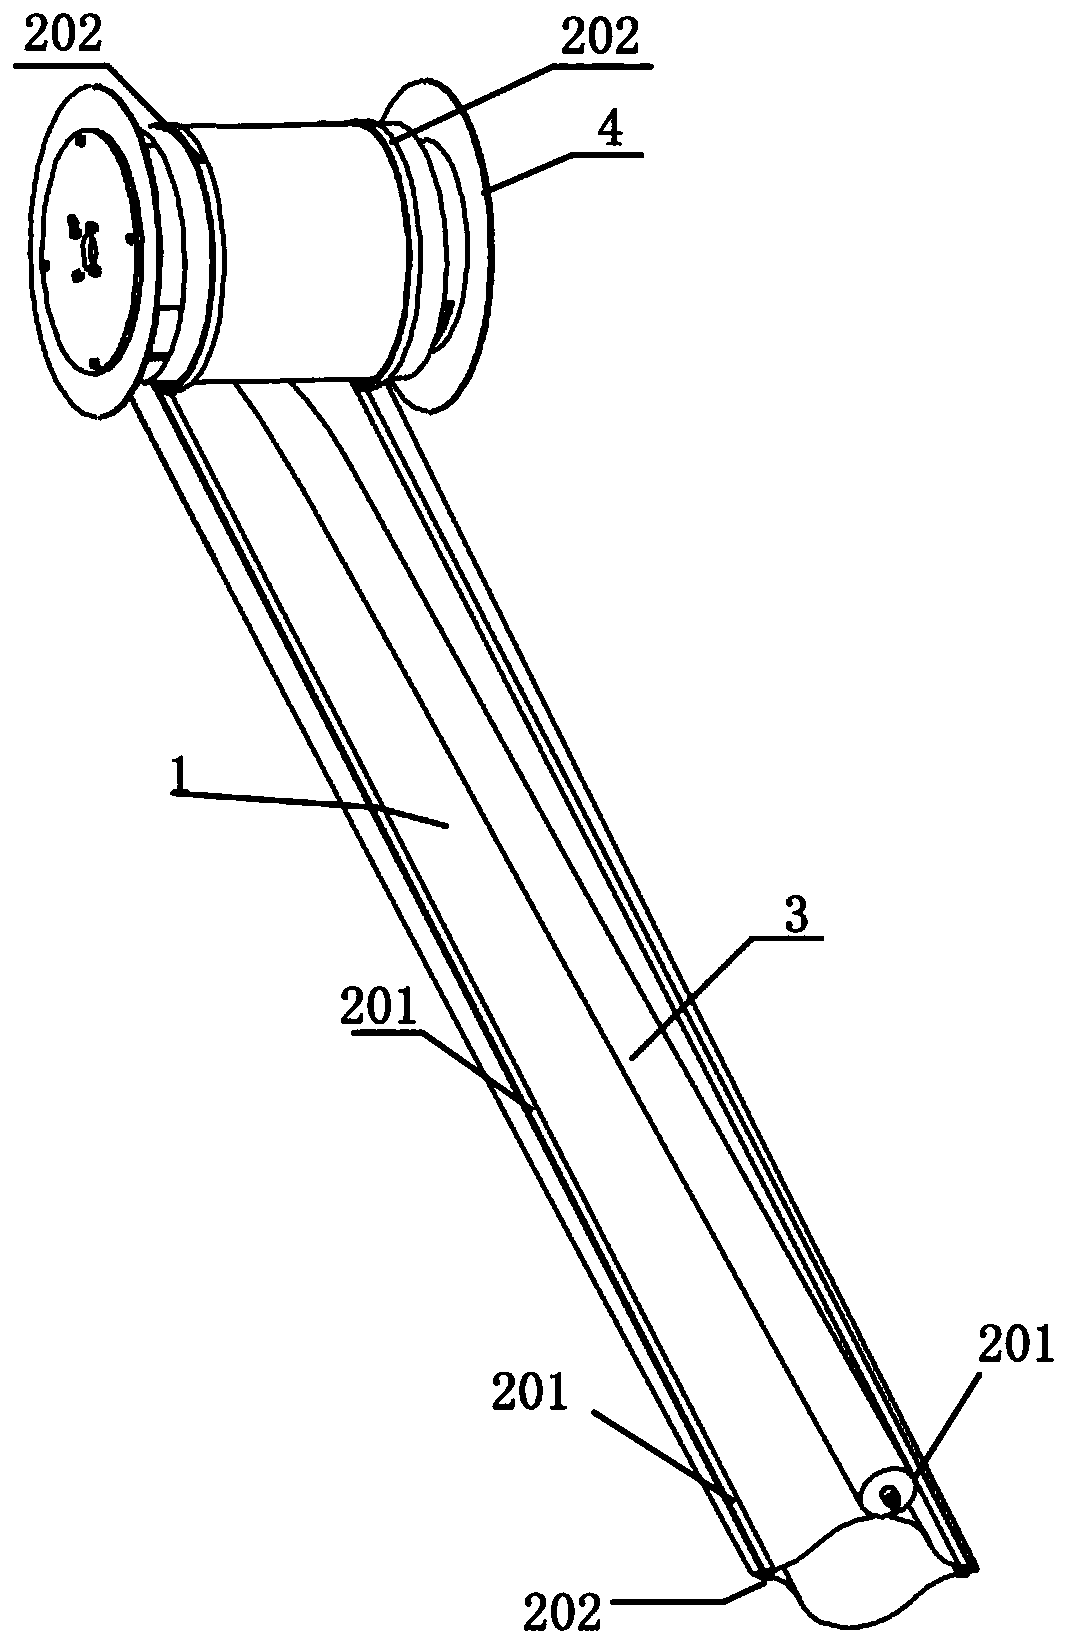 Thin-wall bar support device unfolded by driving of air inflation